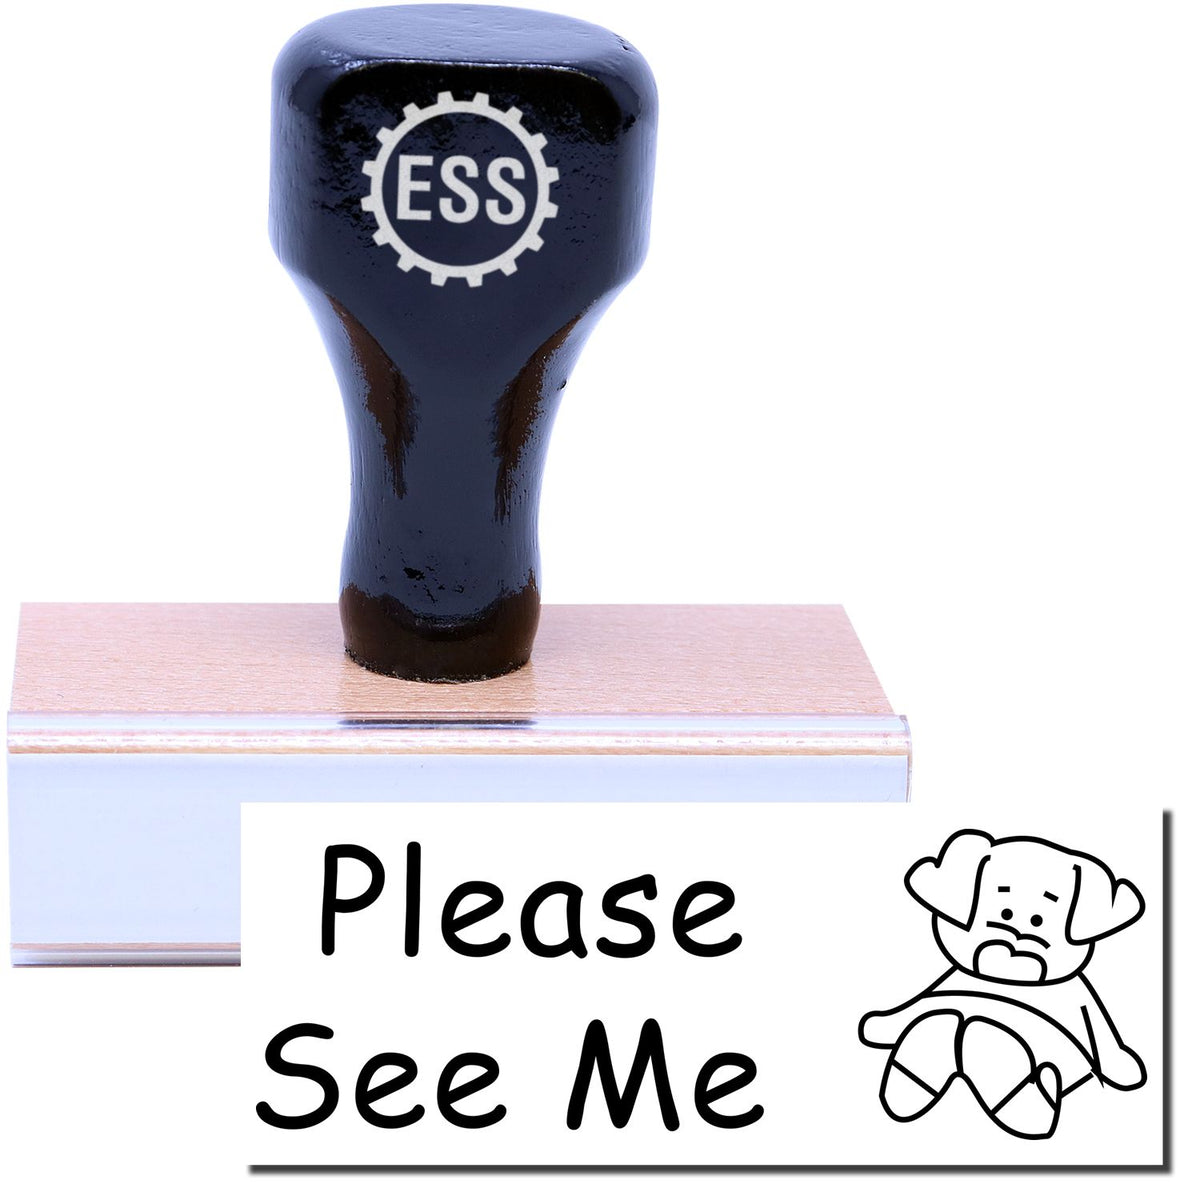 A stock office rubber stamp with a stamped image showing how the text &quot;Please See Me&quot; in a large font with a small image of a dog on the side is displayed after stamping.